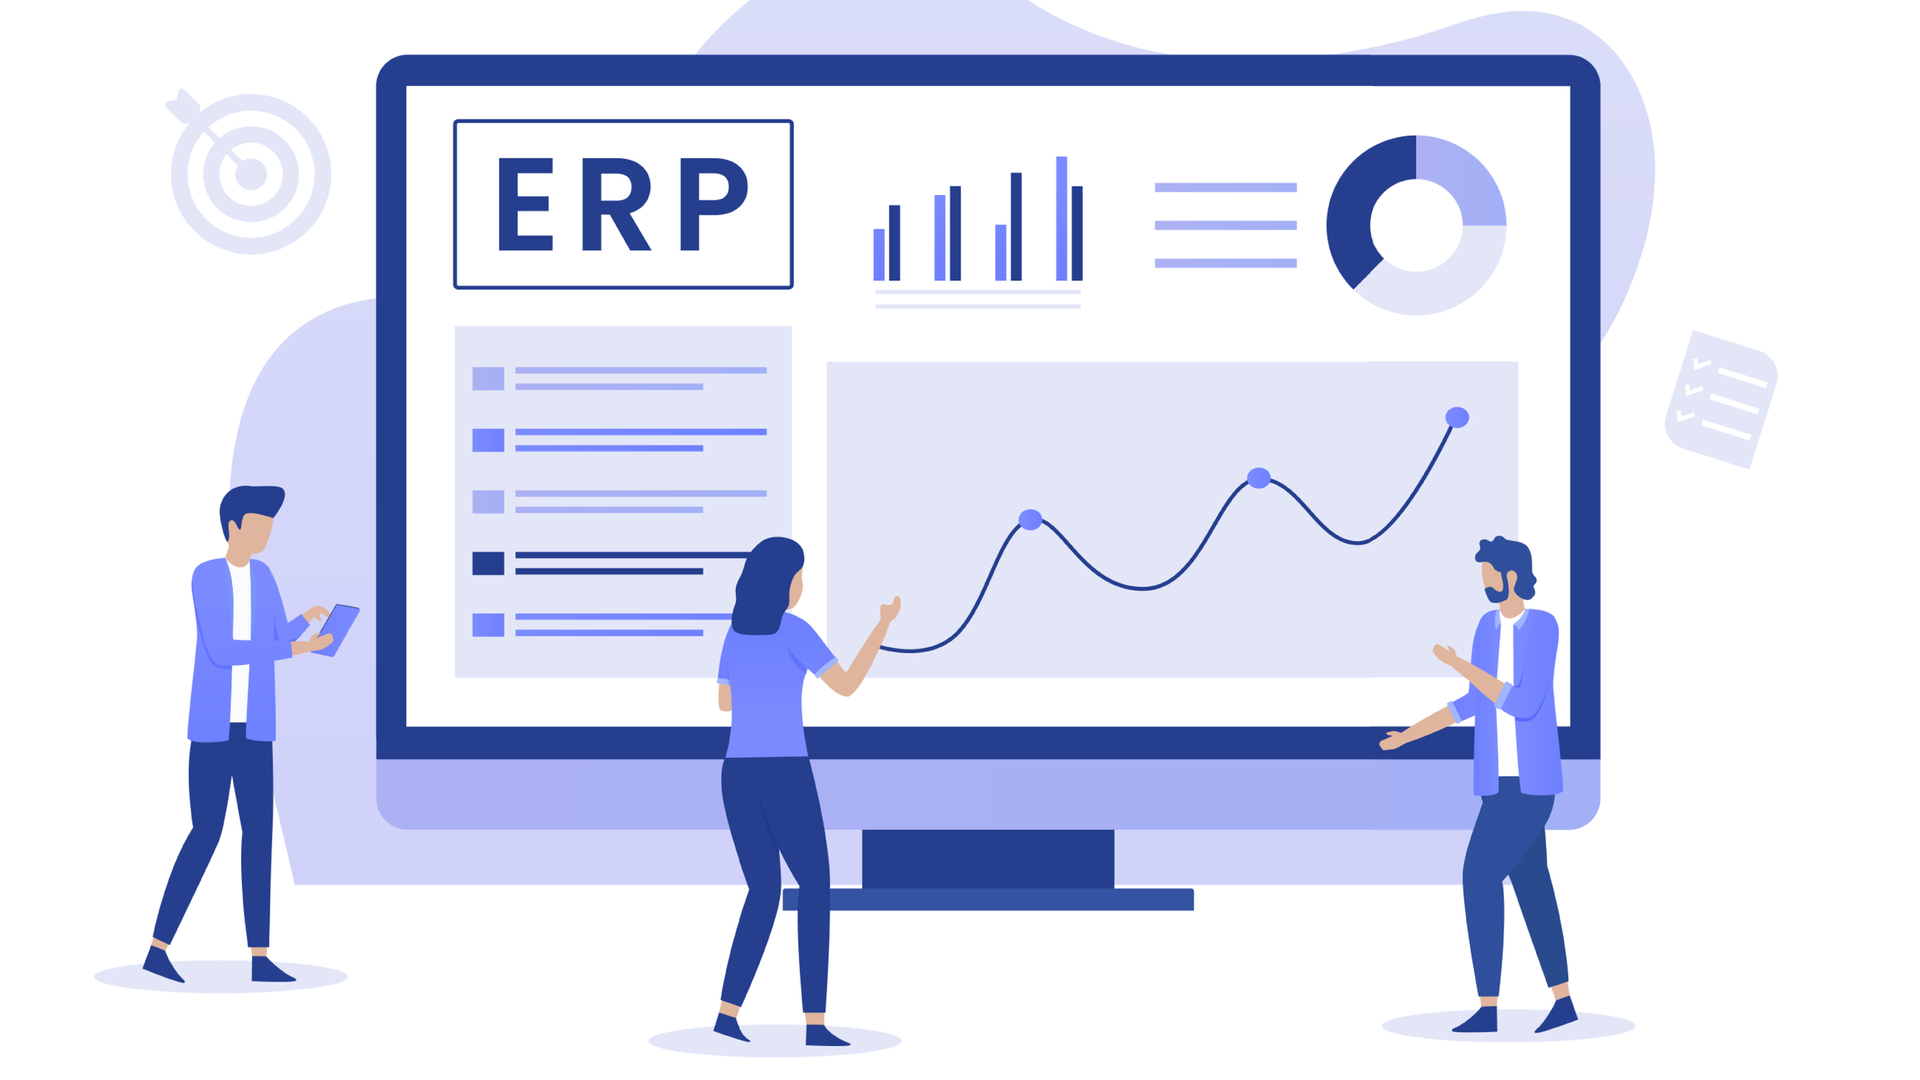 How does ERP software improve productivity and efficiency?